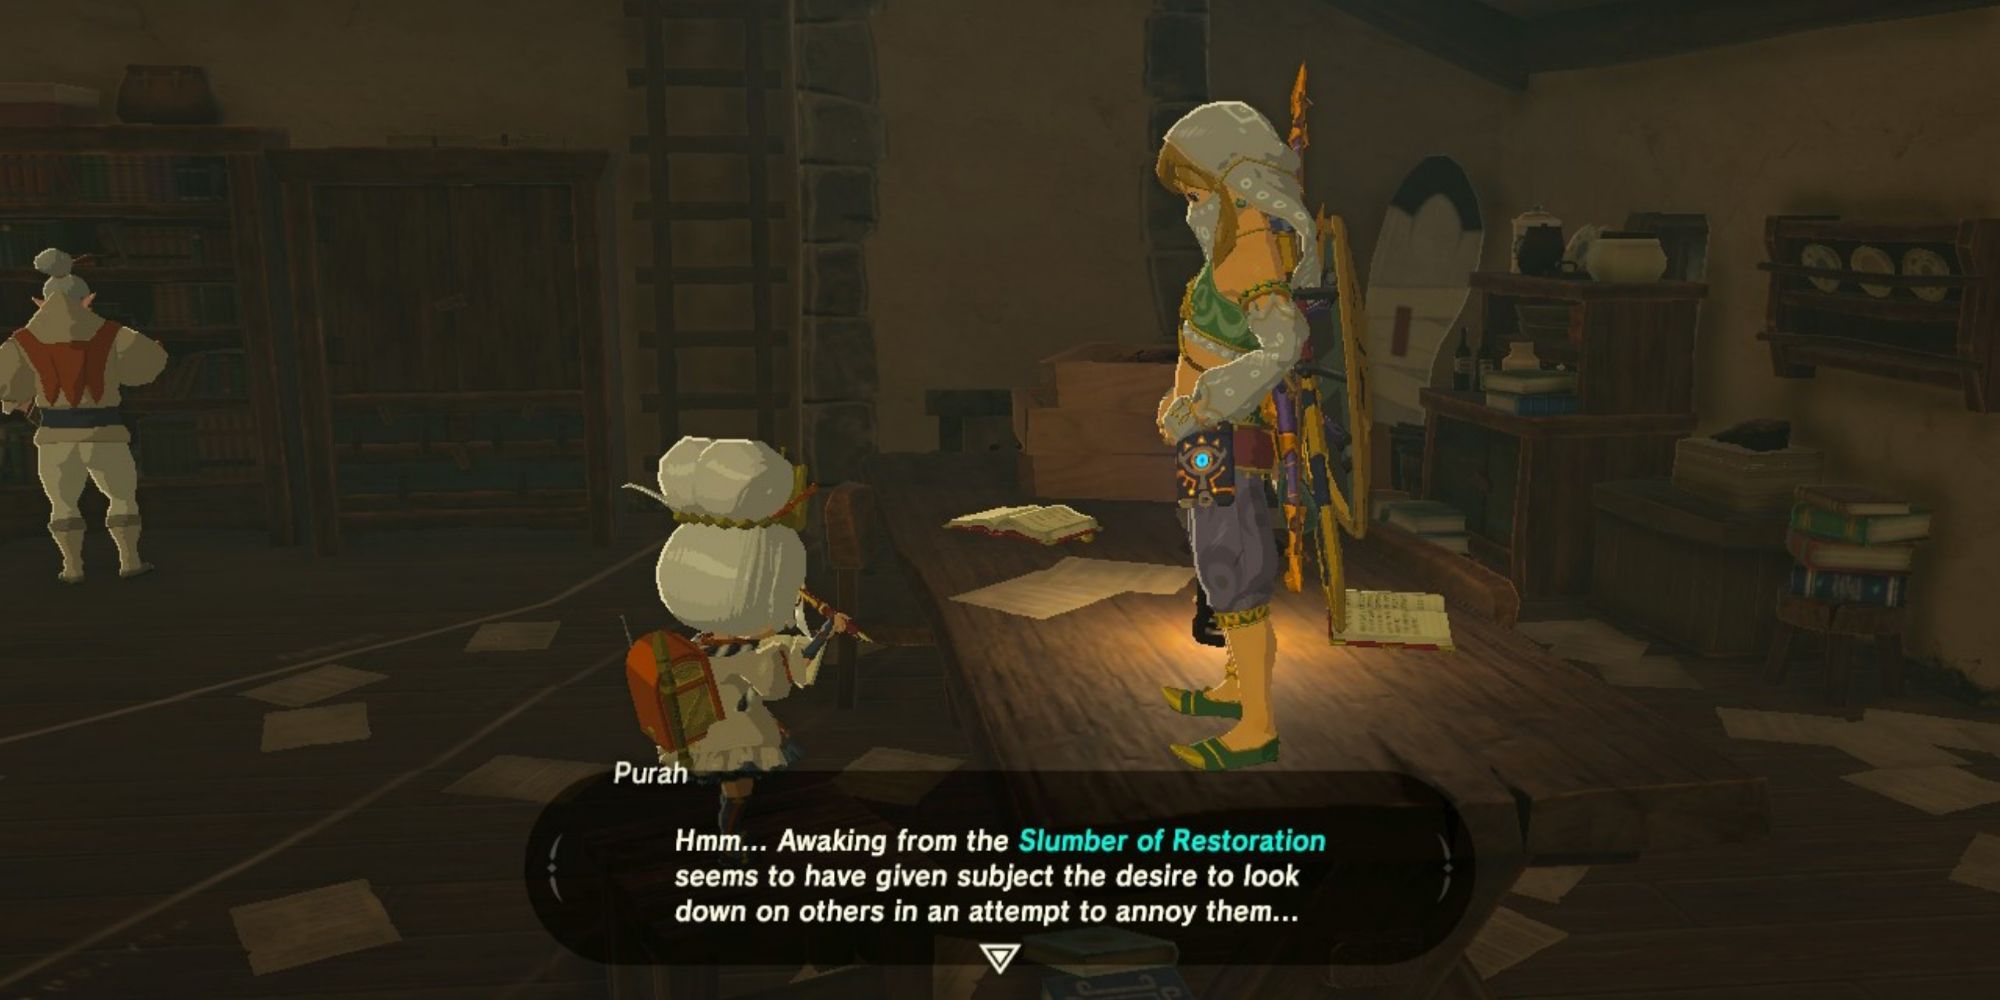 Link speaking to Purah while standing on a table.